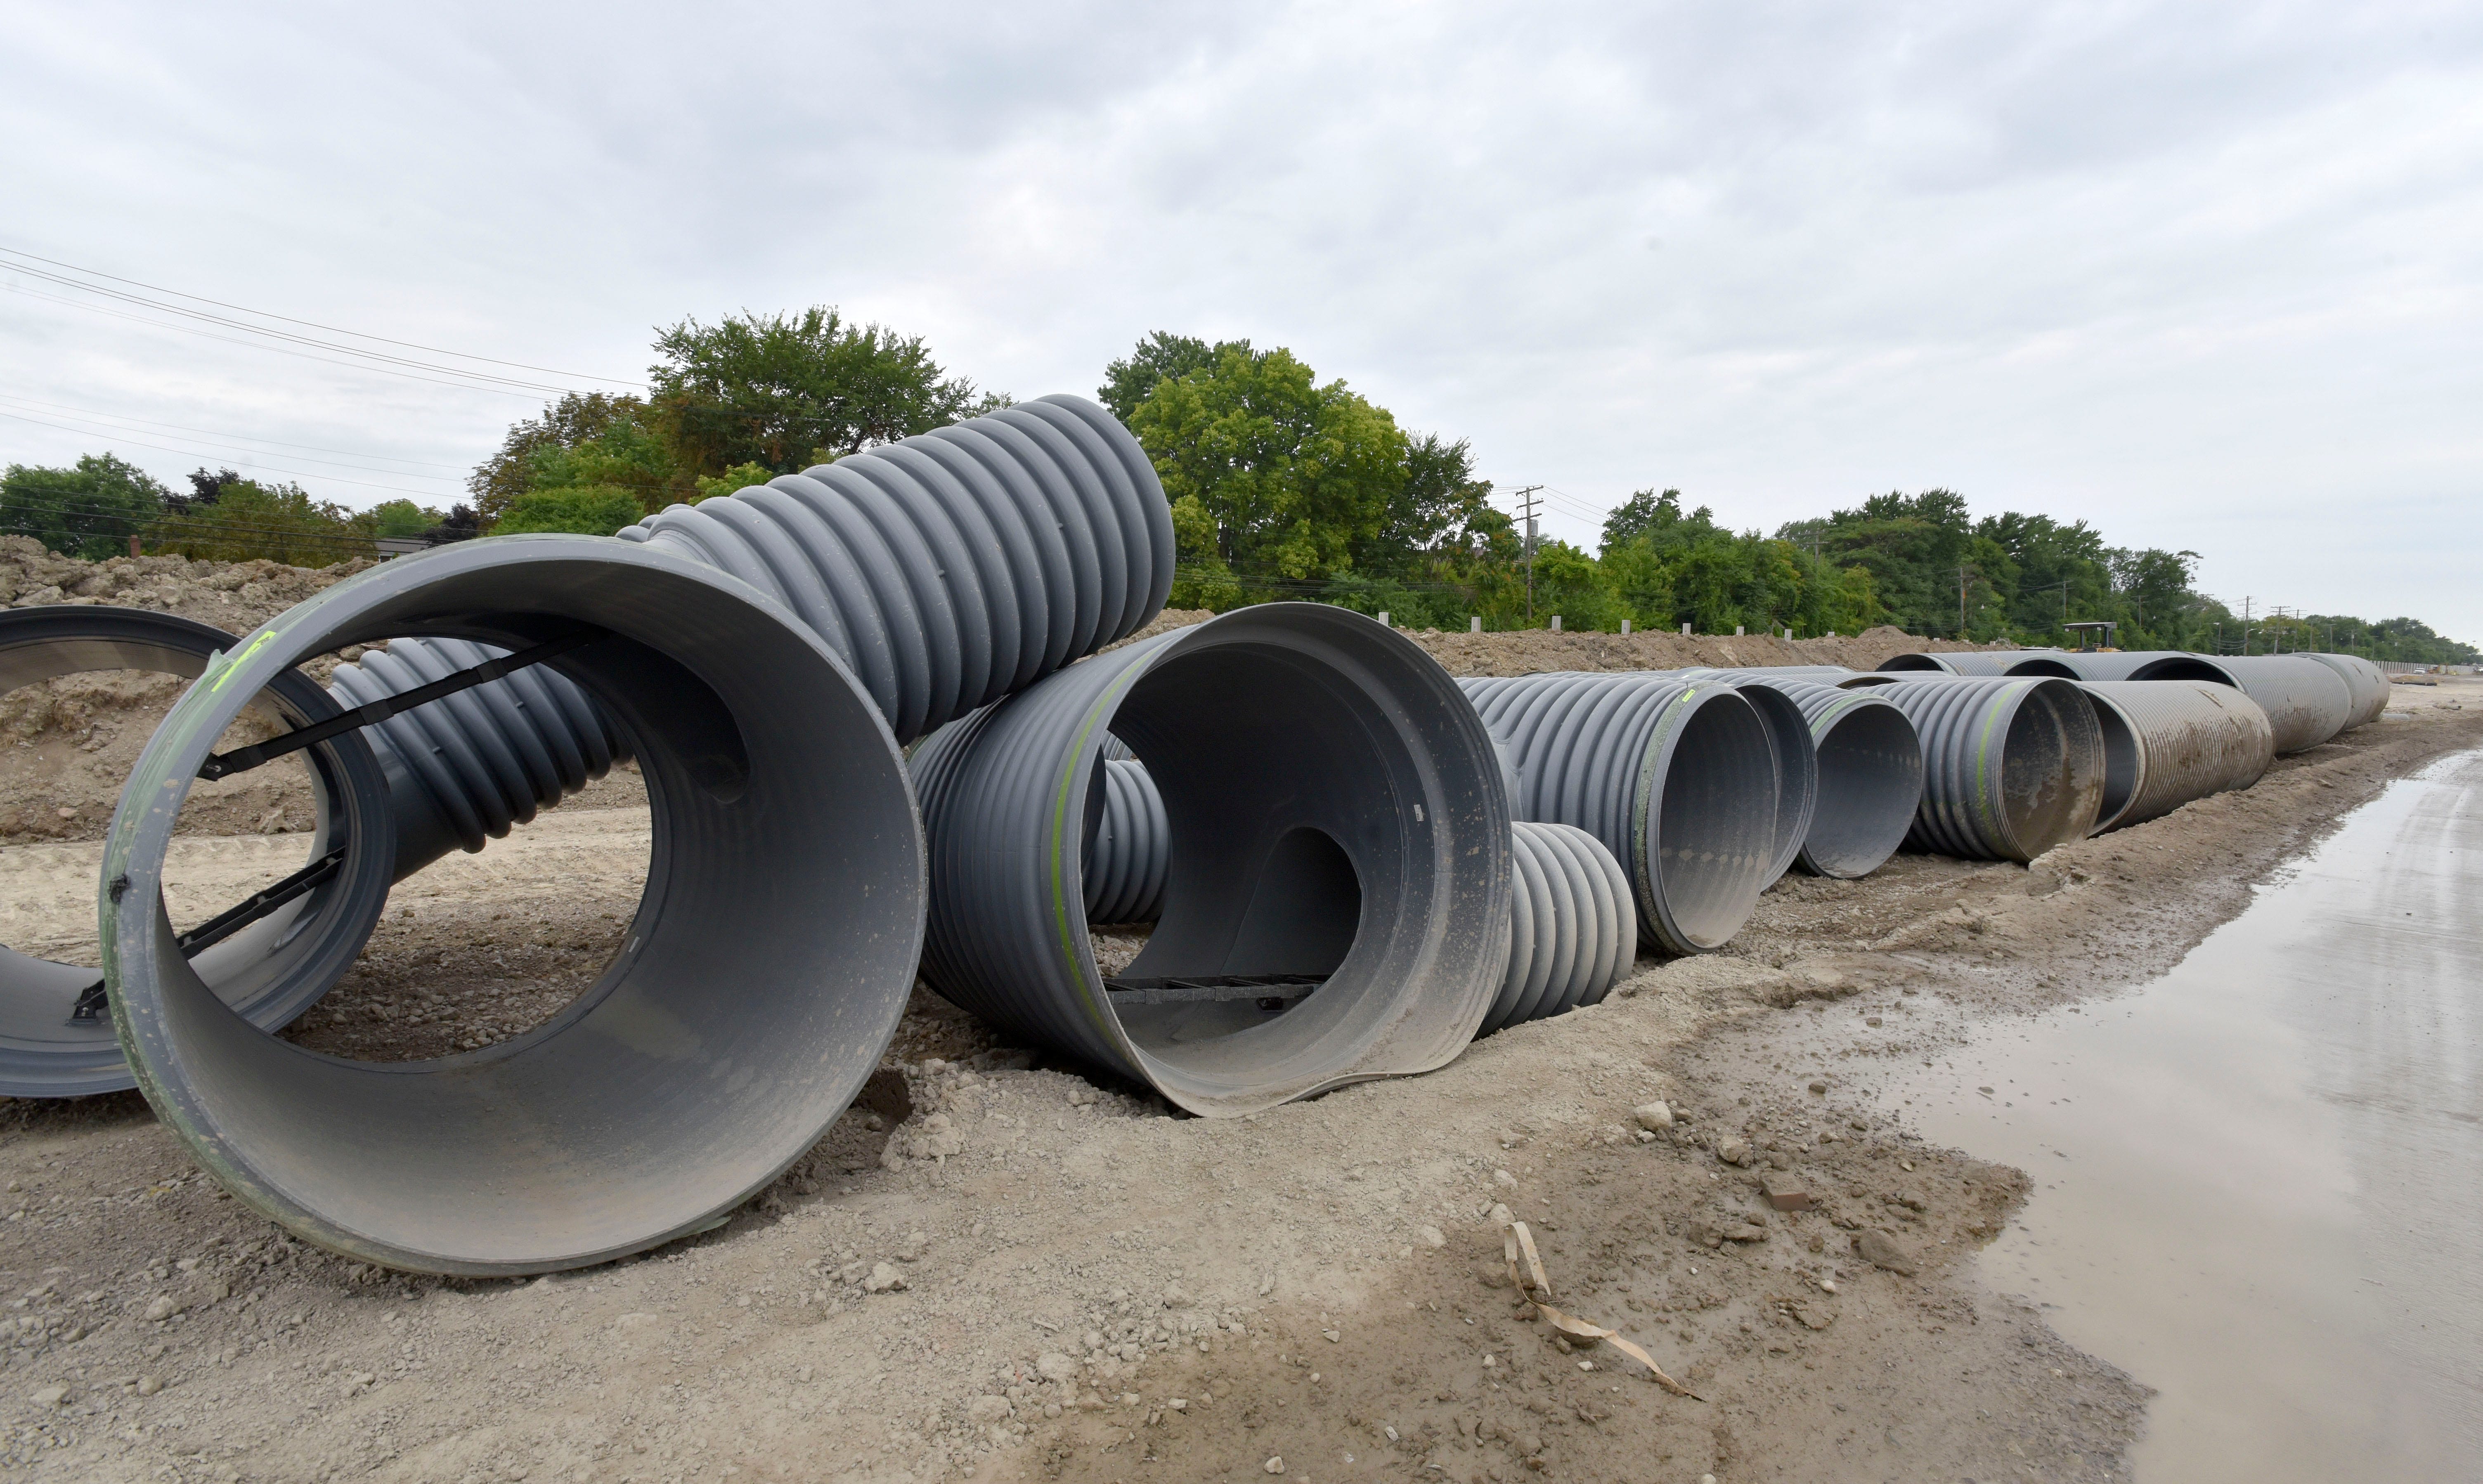 Underground storm sewer pipes are staged before being placed under the employees parking lot, which was St. Jean.